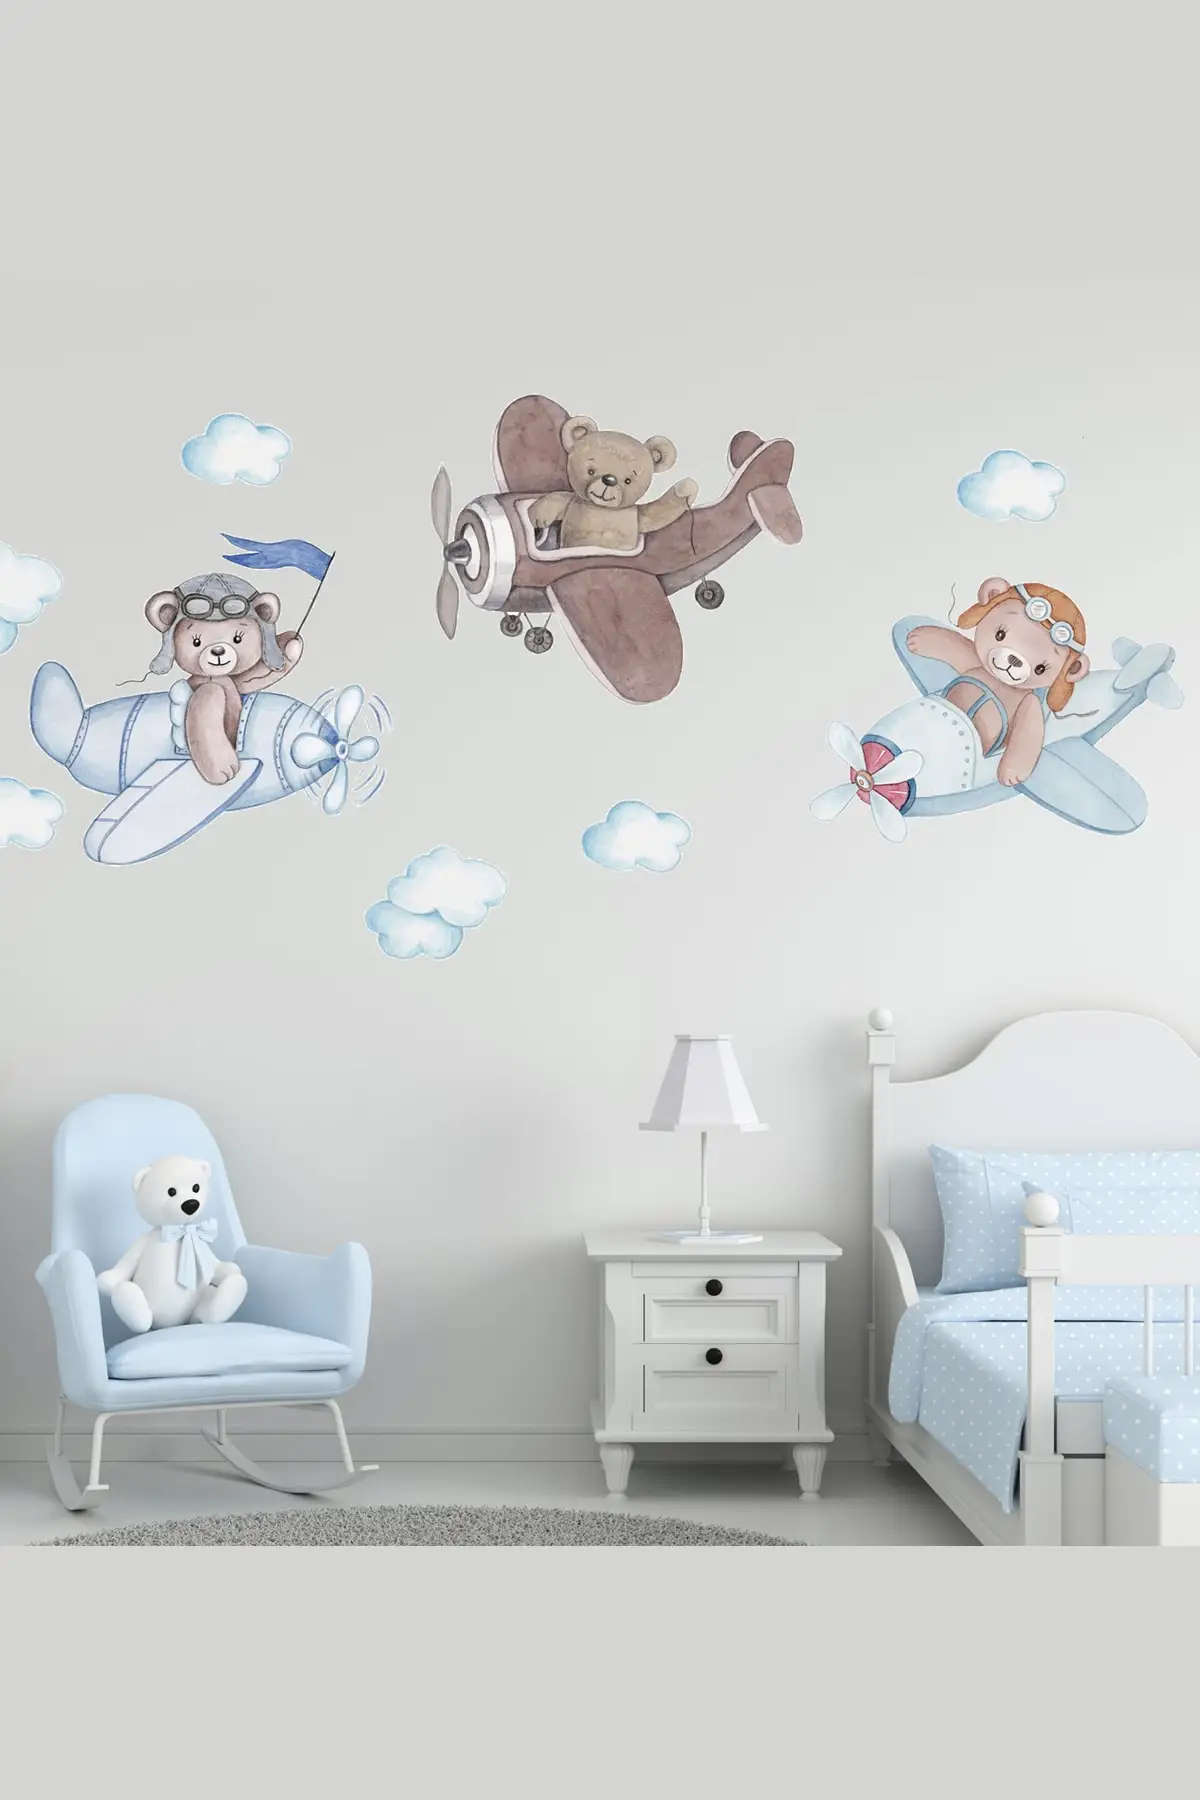 

3 buddy Pilot Bears Wall Stickers Set Elegant Design For Children Quality Product Handy Pleasant To Look Attractive of Interest 2021 Trend